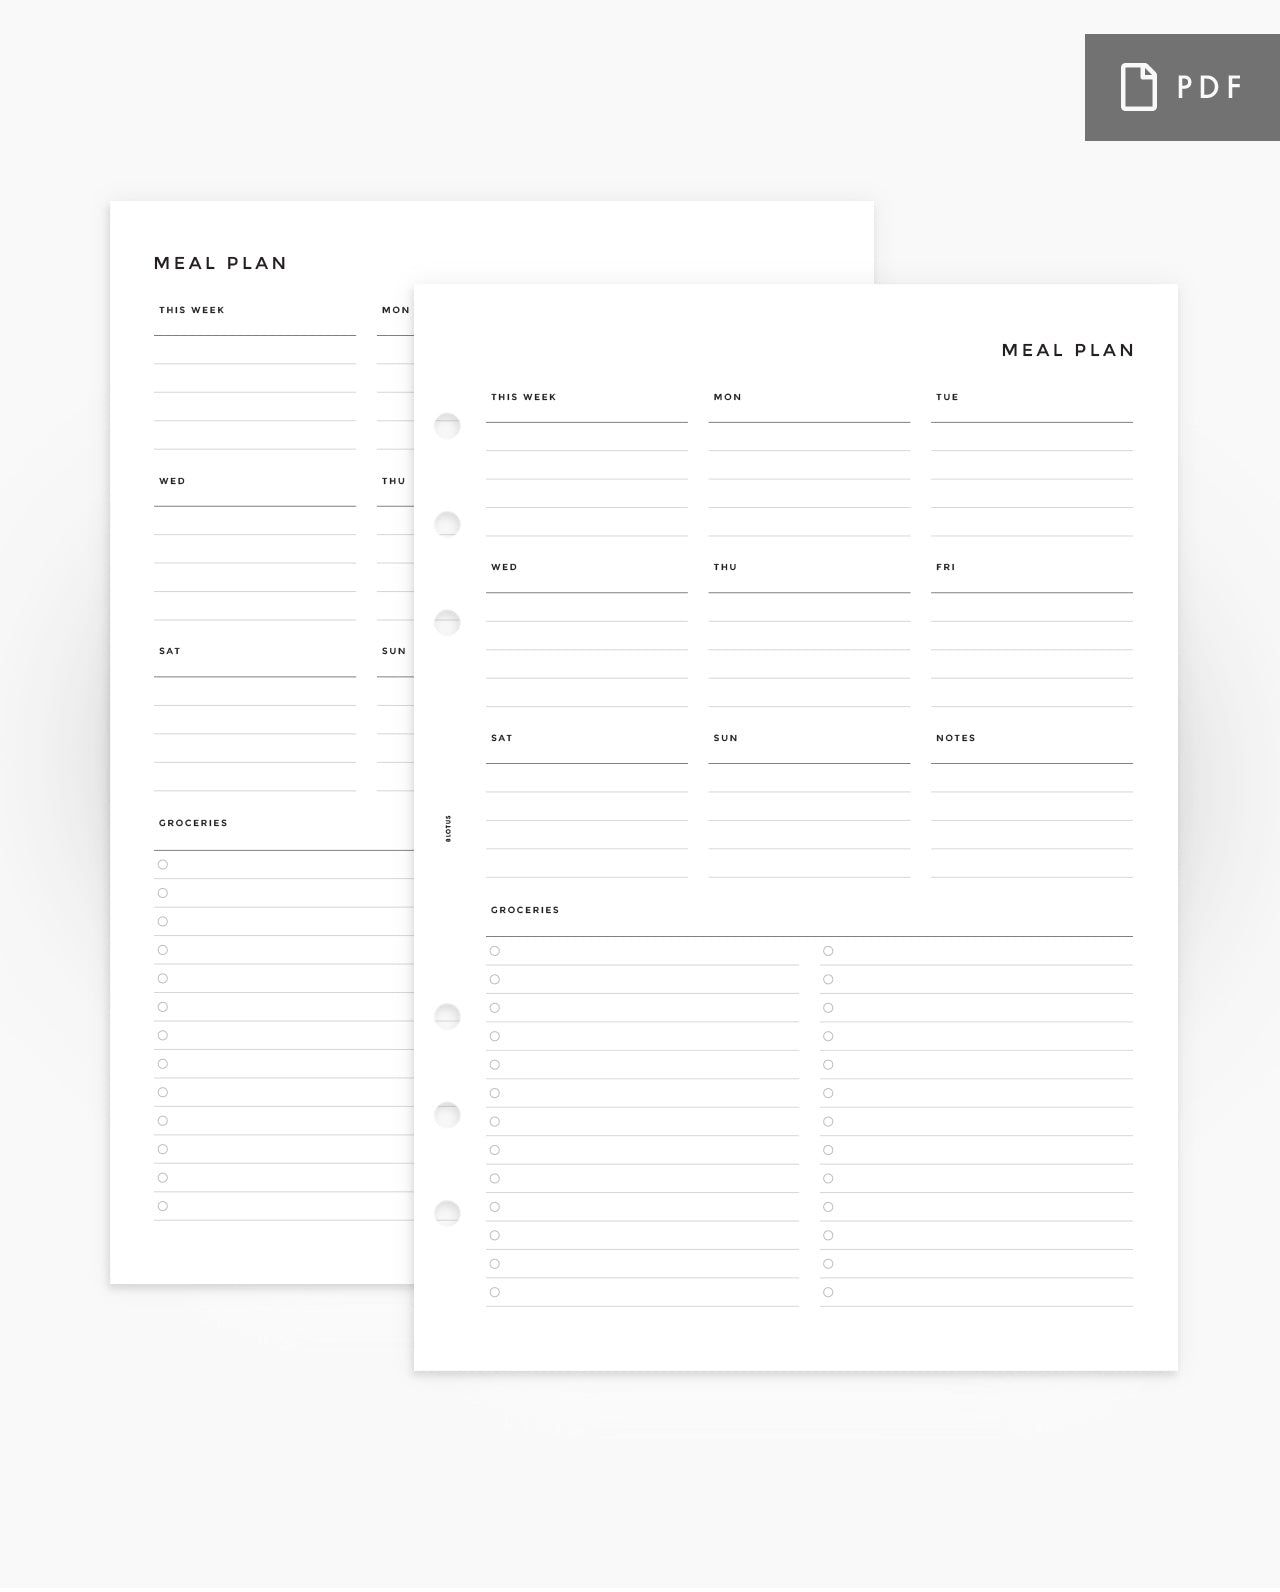 MN126 - Meal Planner - PDF